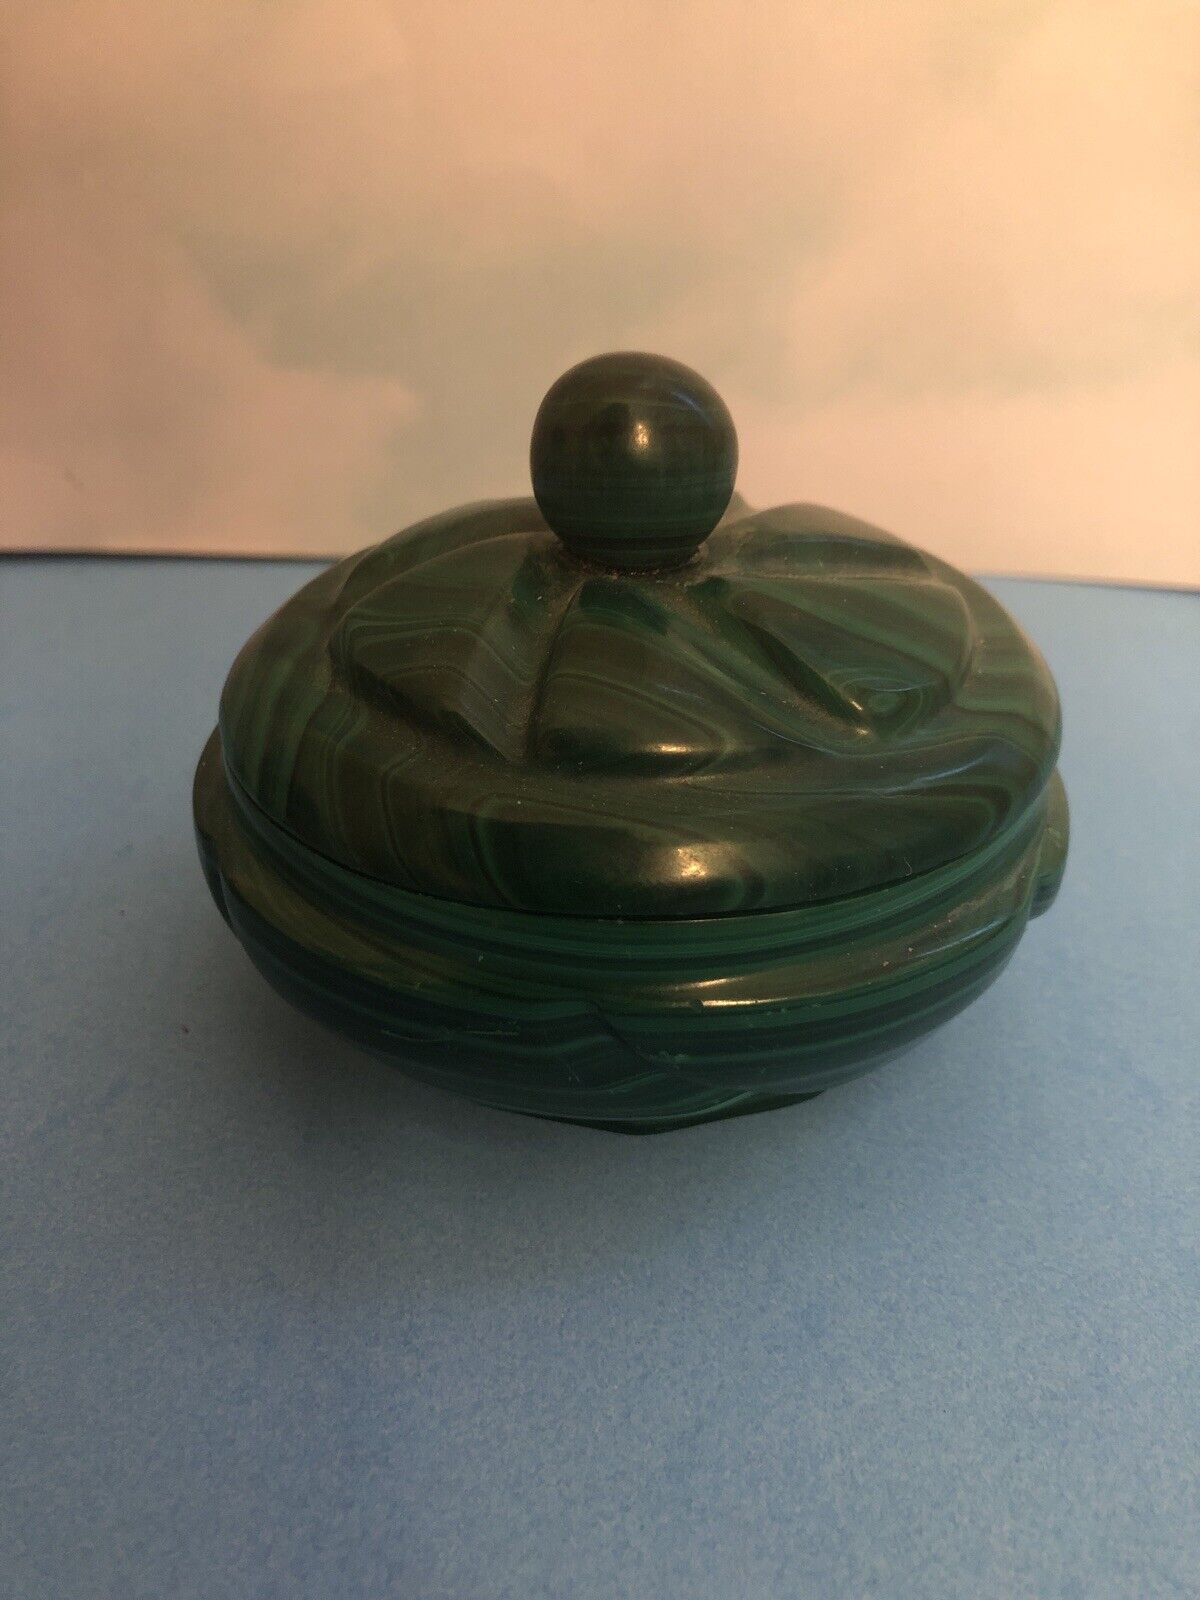 Gorgeous Dark Green Malachite Hand Carved Box Vintage New Old Stock 17.3 Ounces